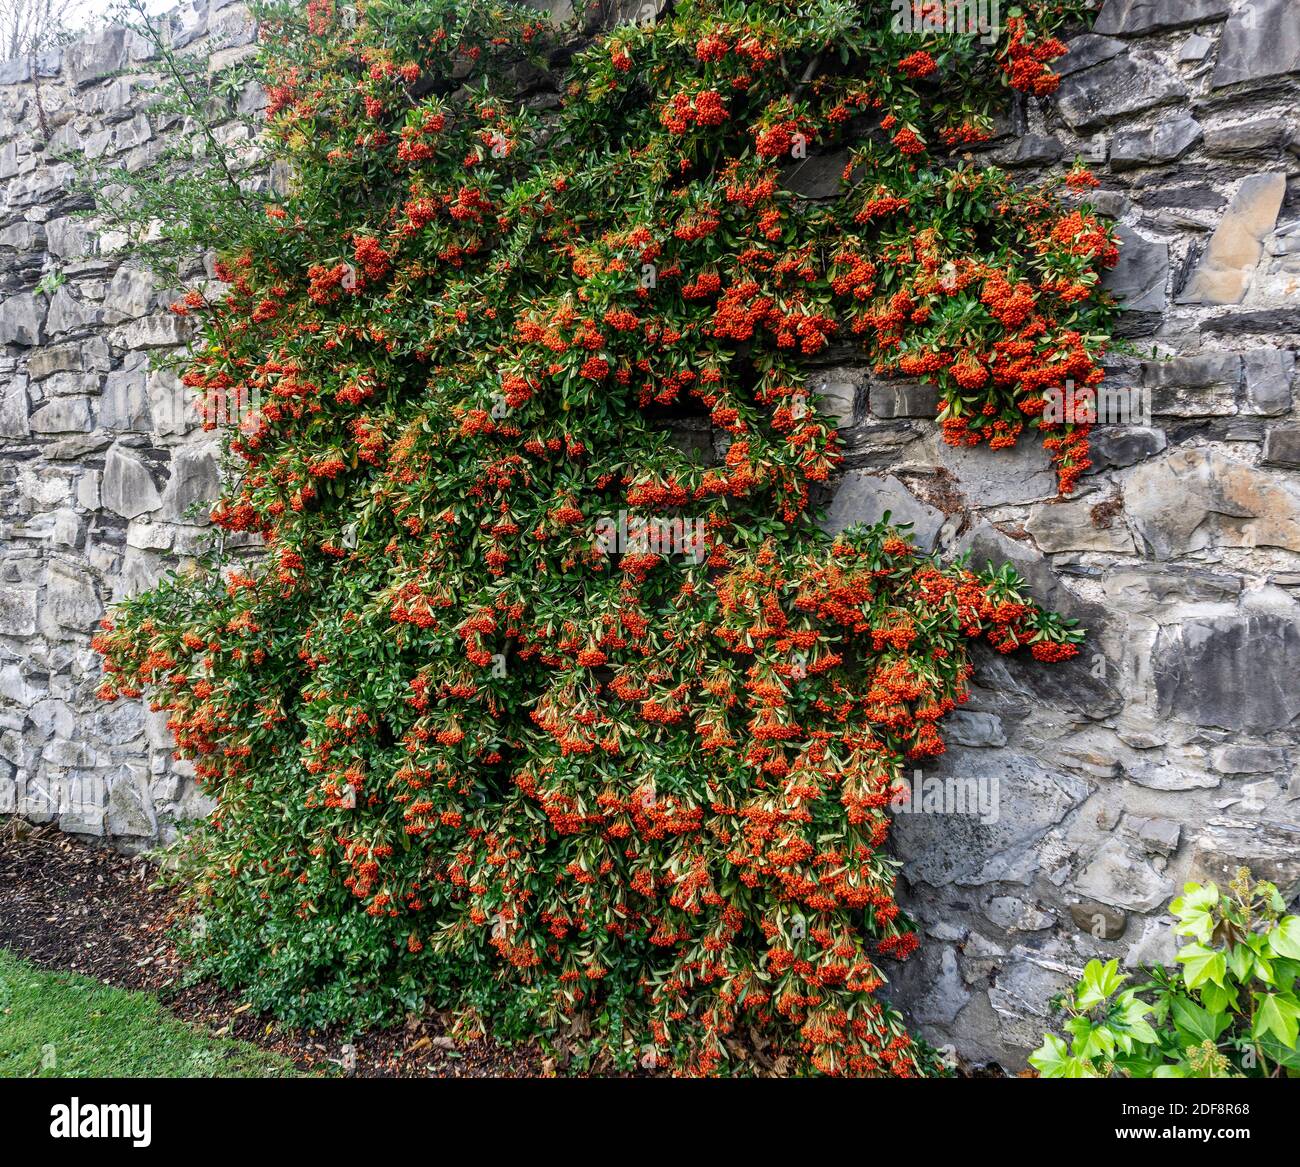 Pyracantha Coccinea, the vibrant red berries of Pyracantha Coccinea Scarlet Firethorn trained here to grow on an brick, old wall. Stock Photo